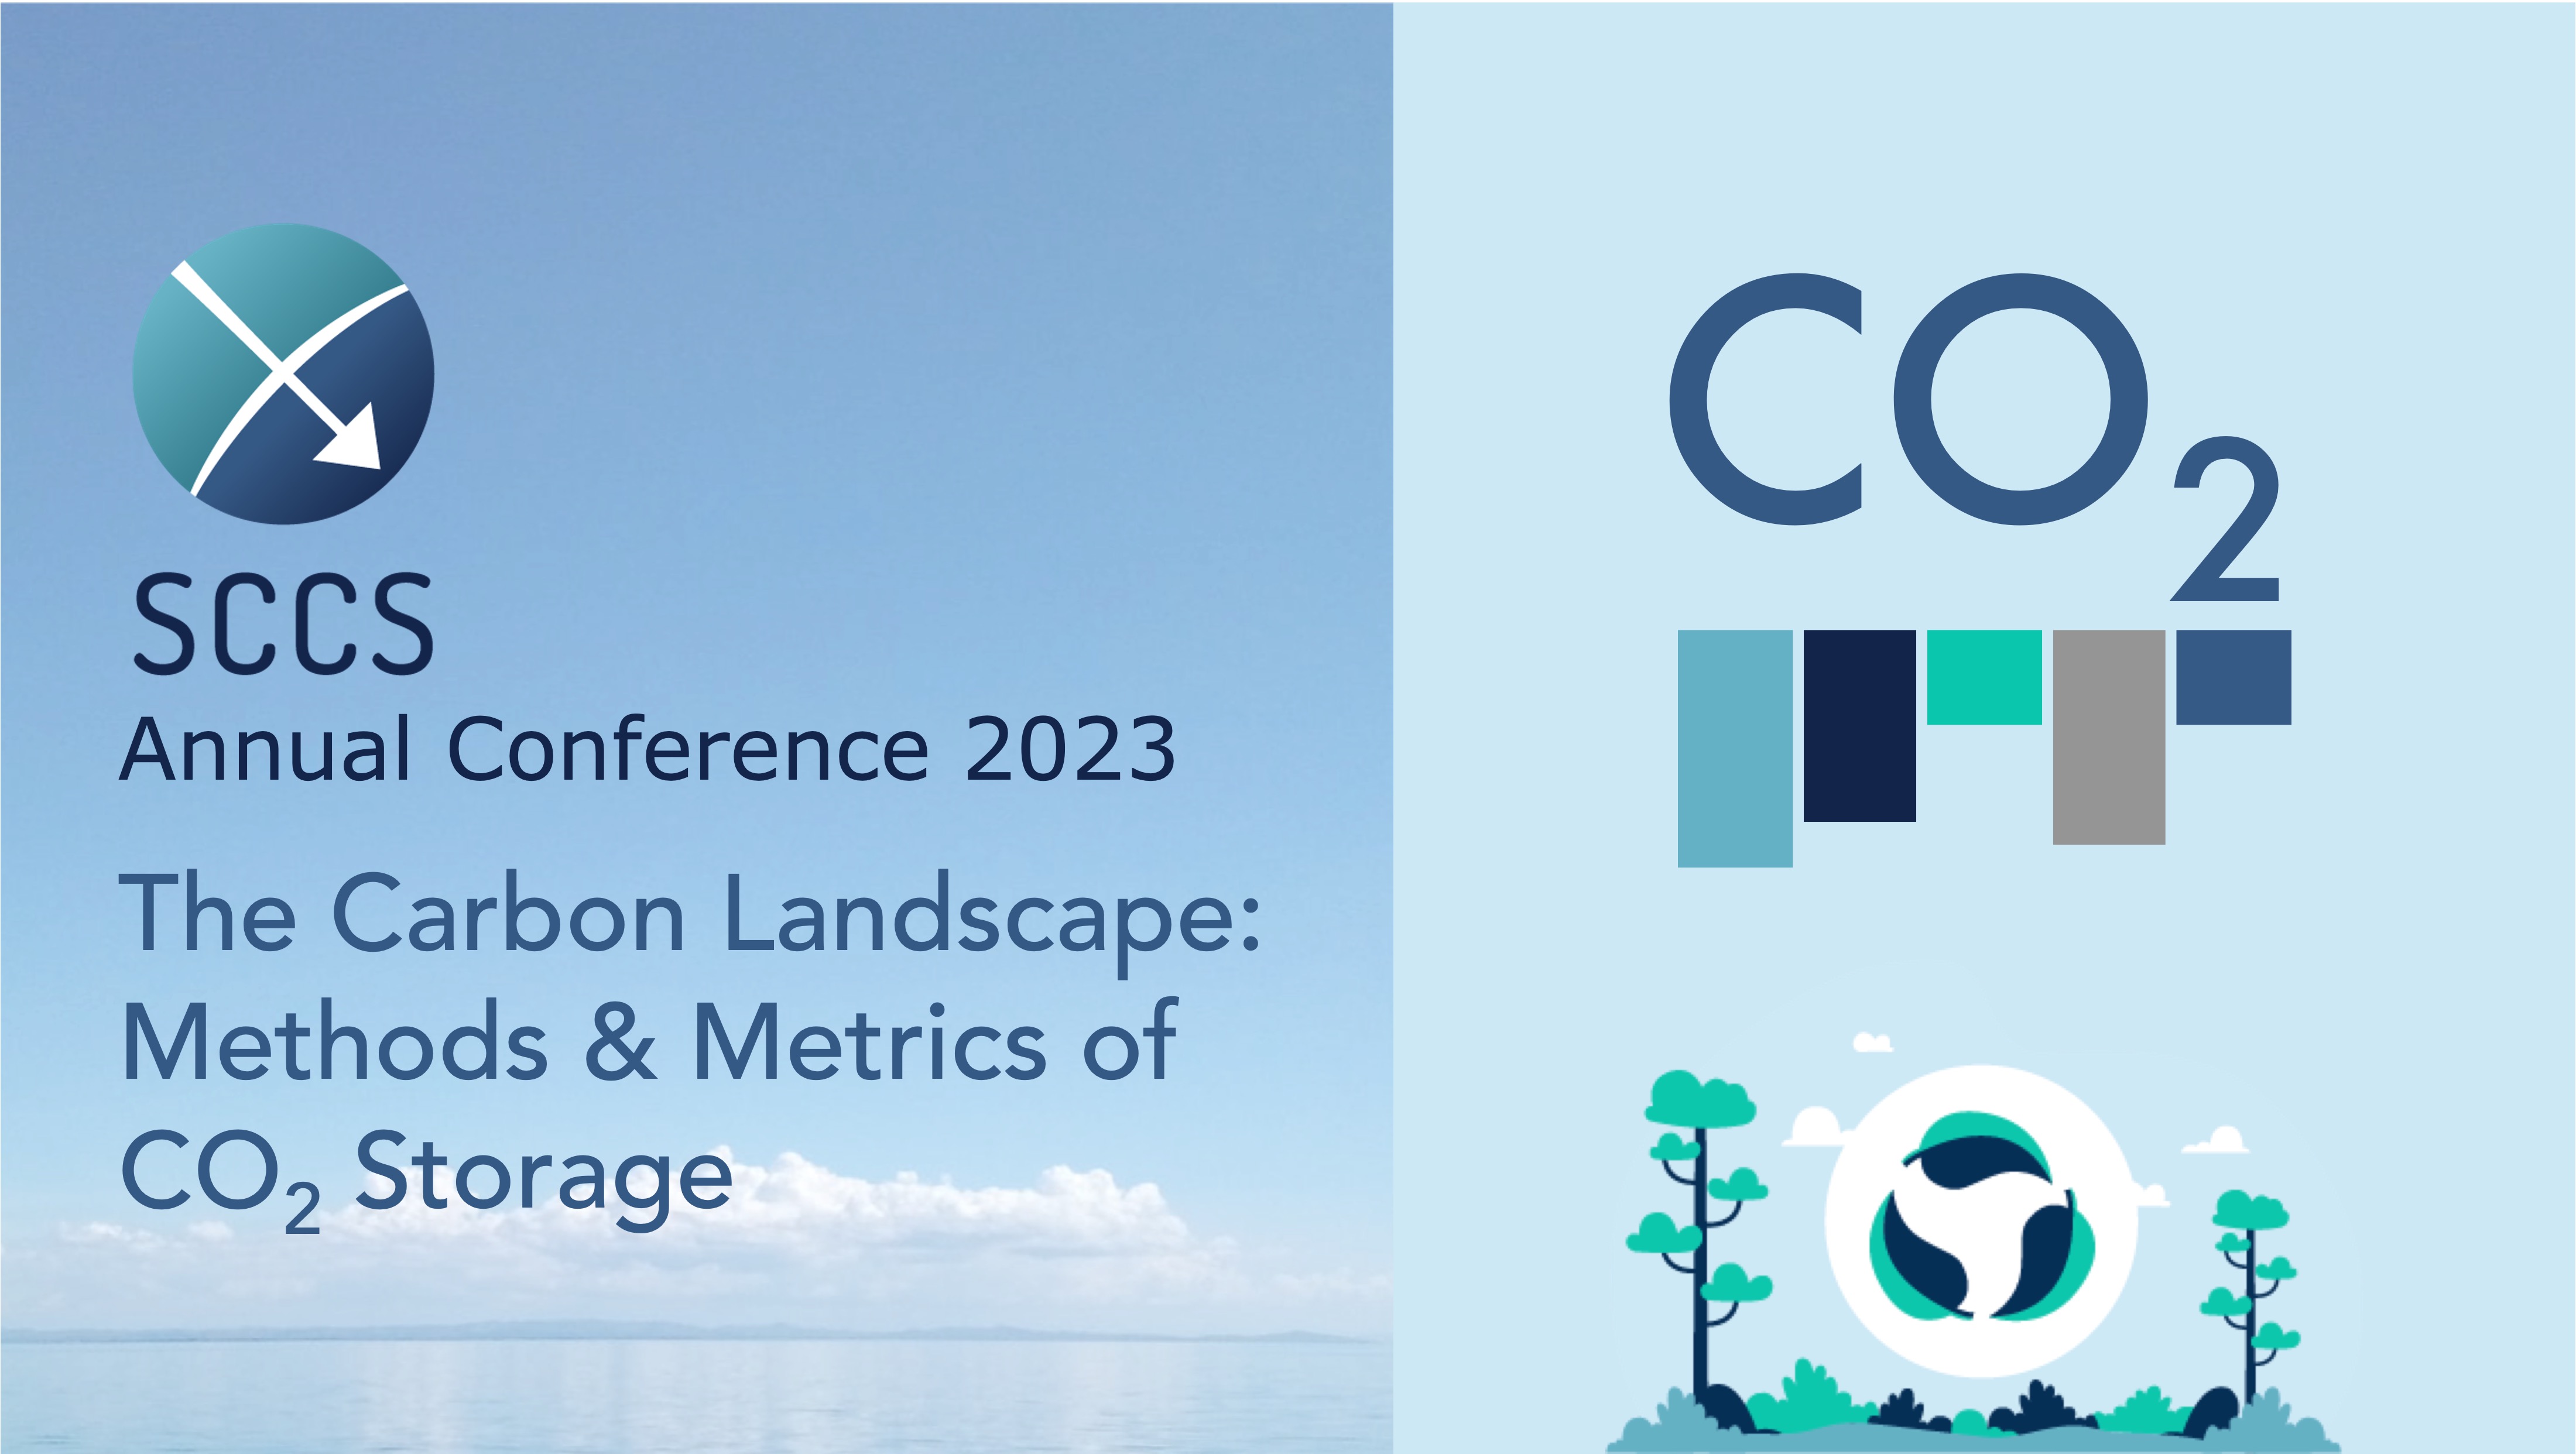 SCCS Annual Conference 2023 flyer logo